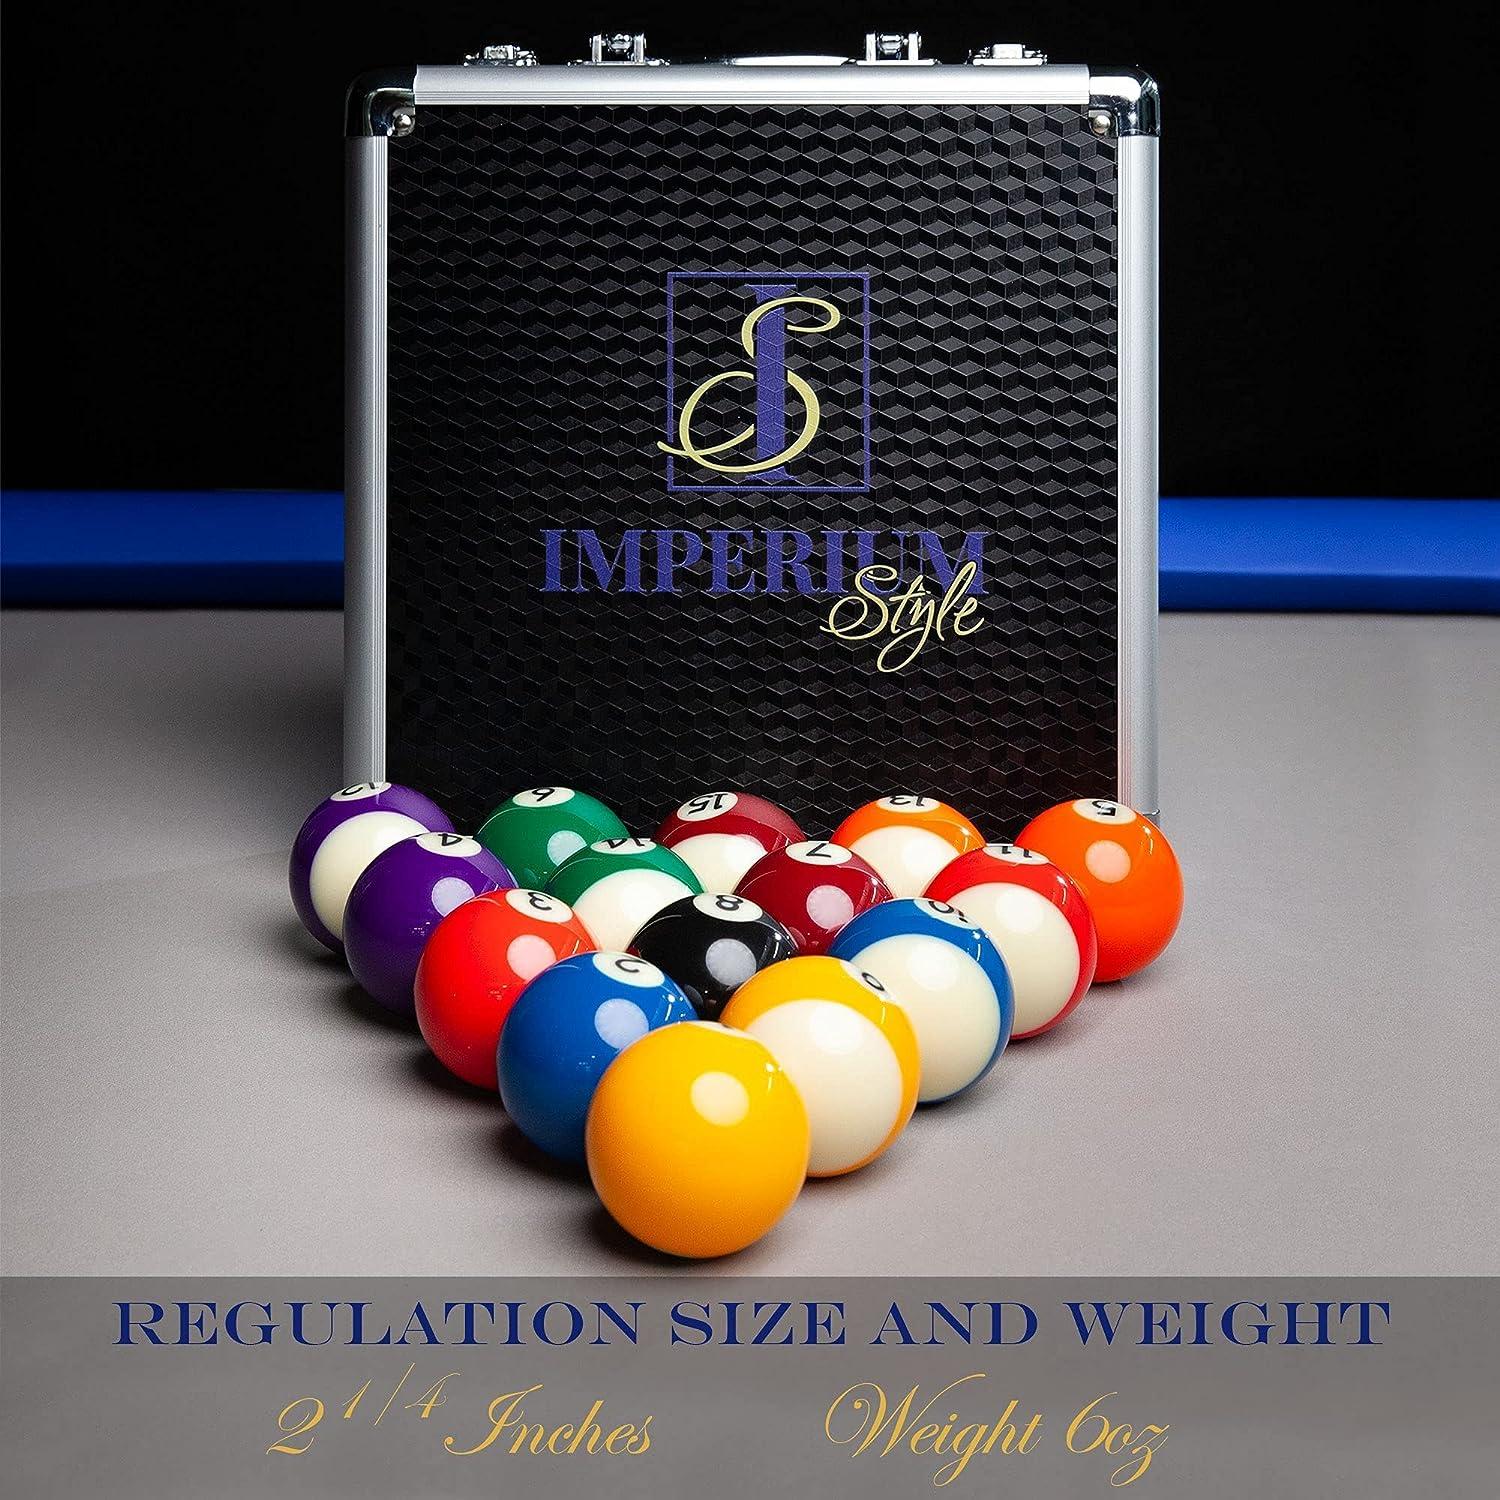 Imperium Style Pool Balls Billiard Set - Regulation Size - 17 Pc  Professional Pool Set w/Cue Ball and Sleek Black and Silver Case - Multi  Colored 